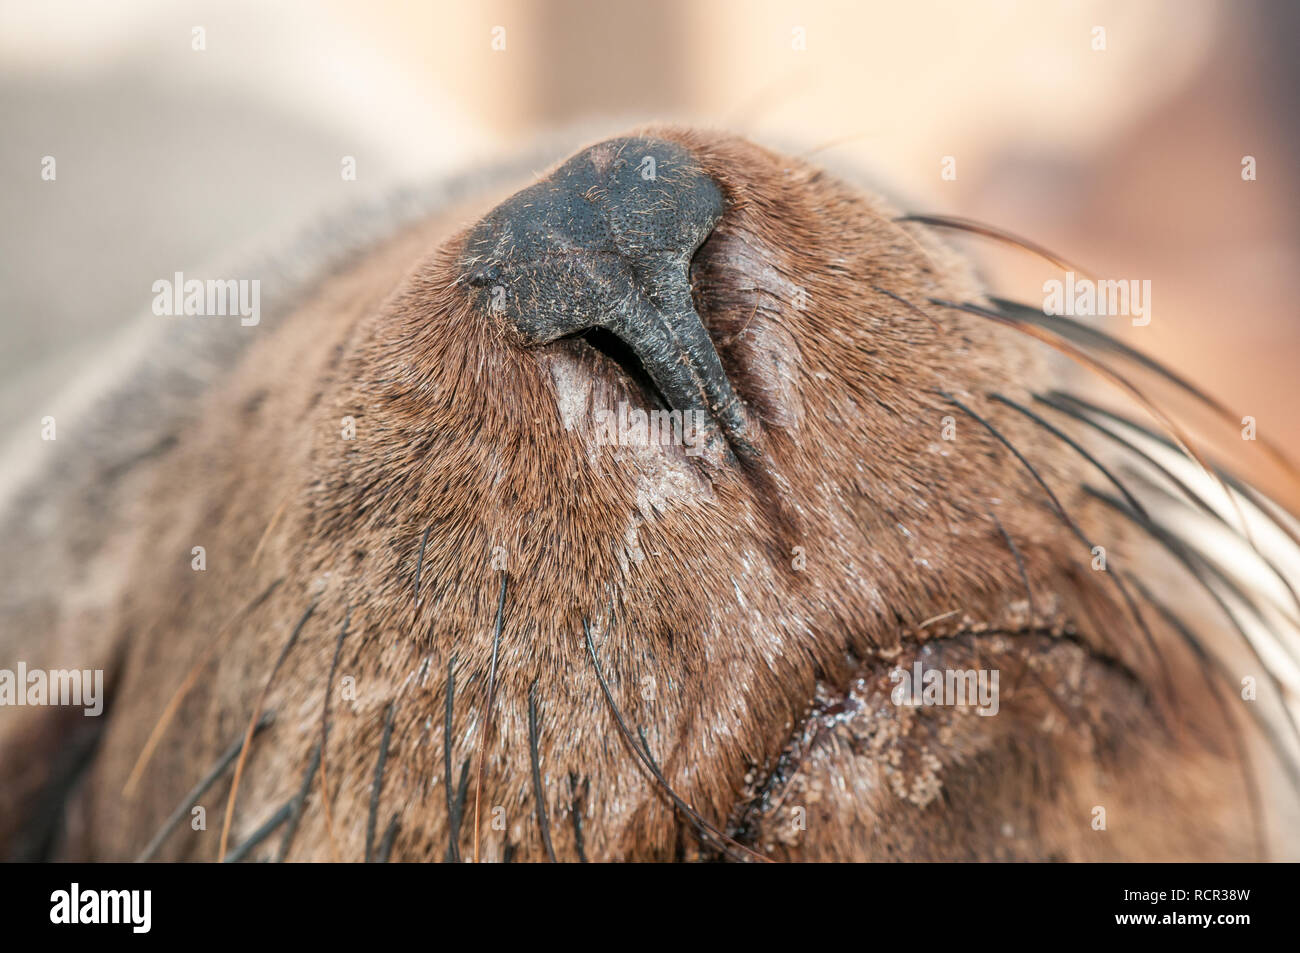 Brown fur seal, Arctocephalus pusillus, snout with whiskers, Cape Cross Seal Reserve, Namibia Stock Photo